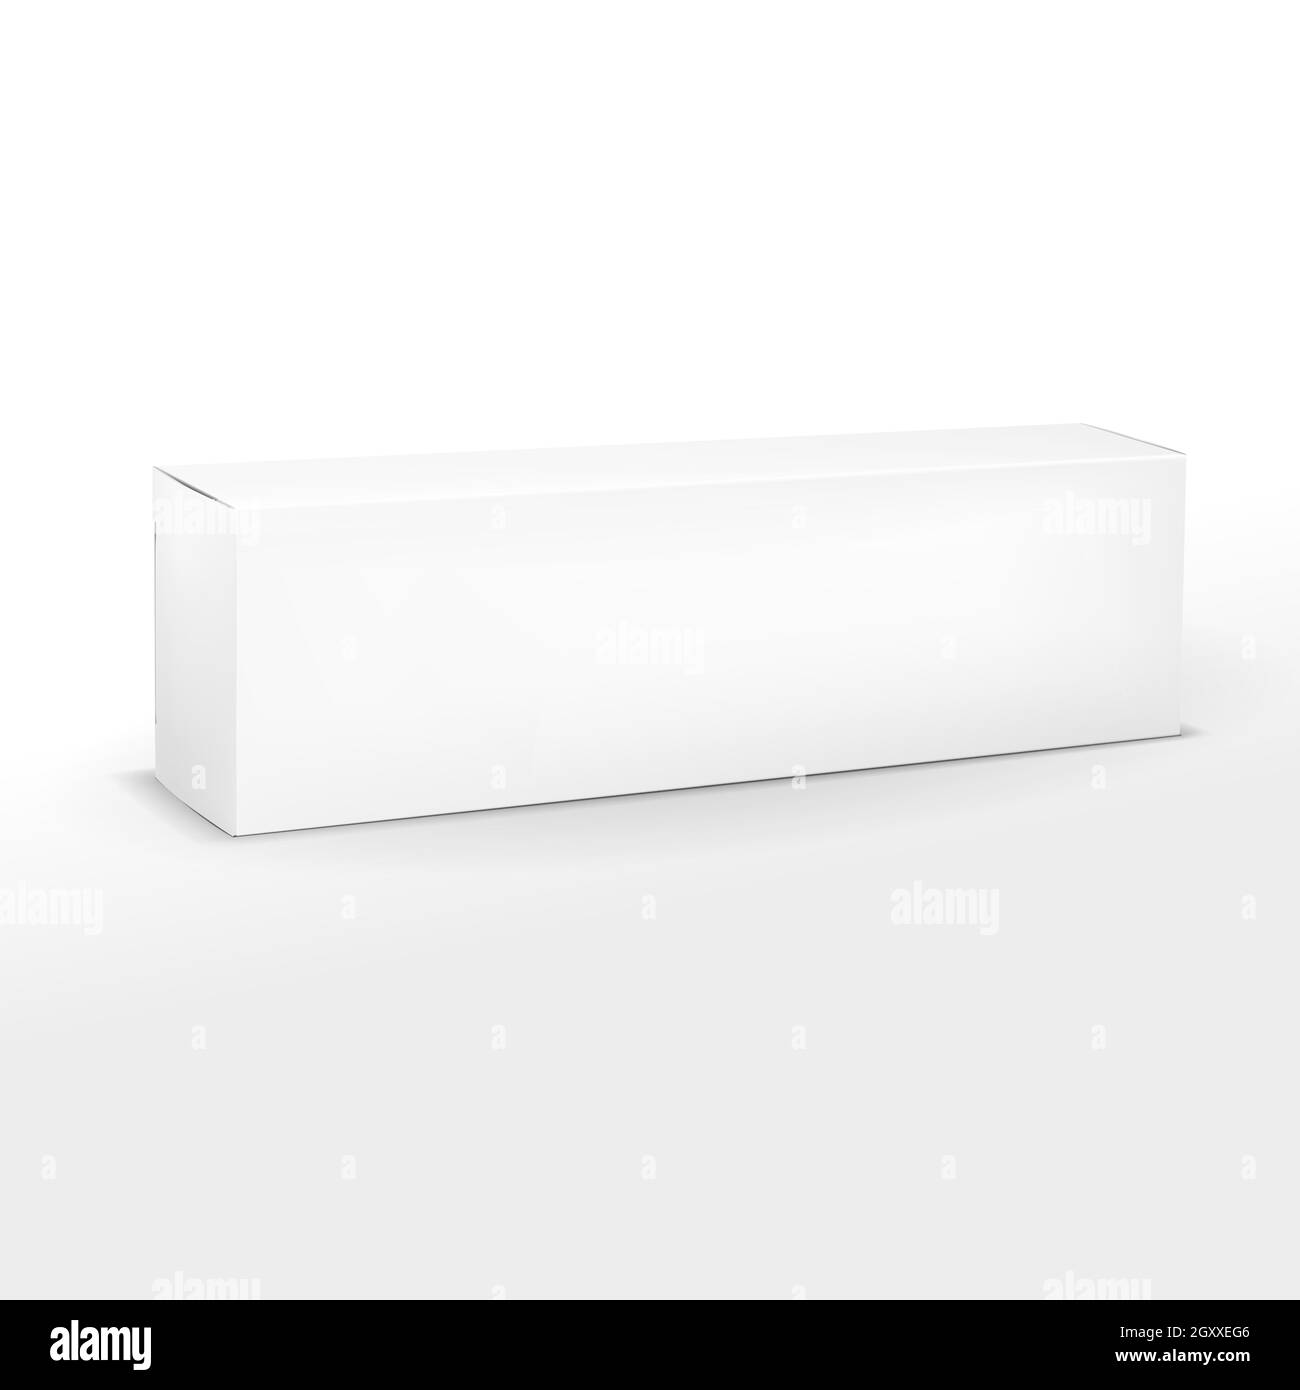 Realistic Long White Paper Or Cardboard Box Mockup For Toothpaste Cosmetics Cream Packaging Collection Box Design Template Vector Illustration Is Stock Photo Alamy